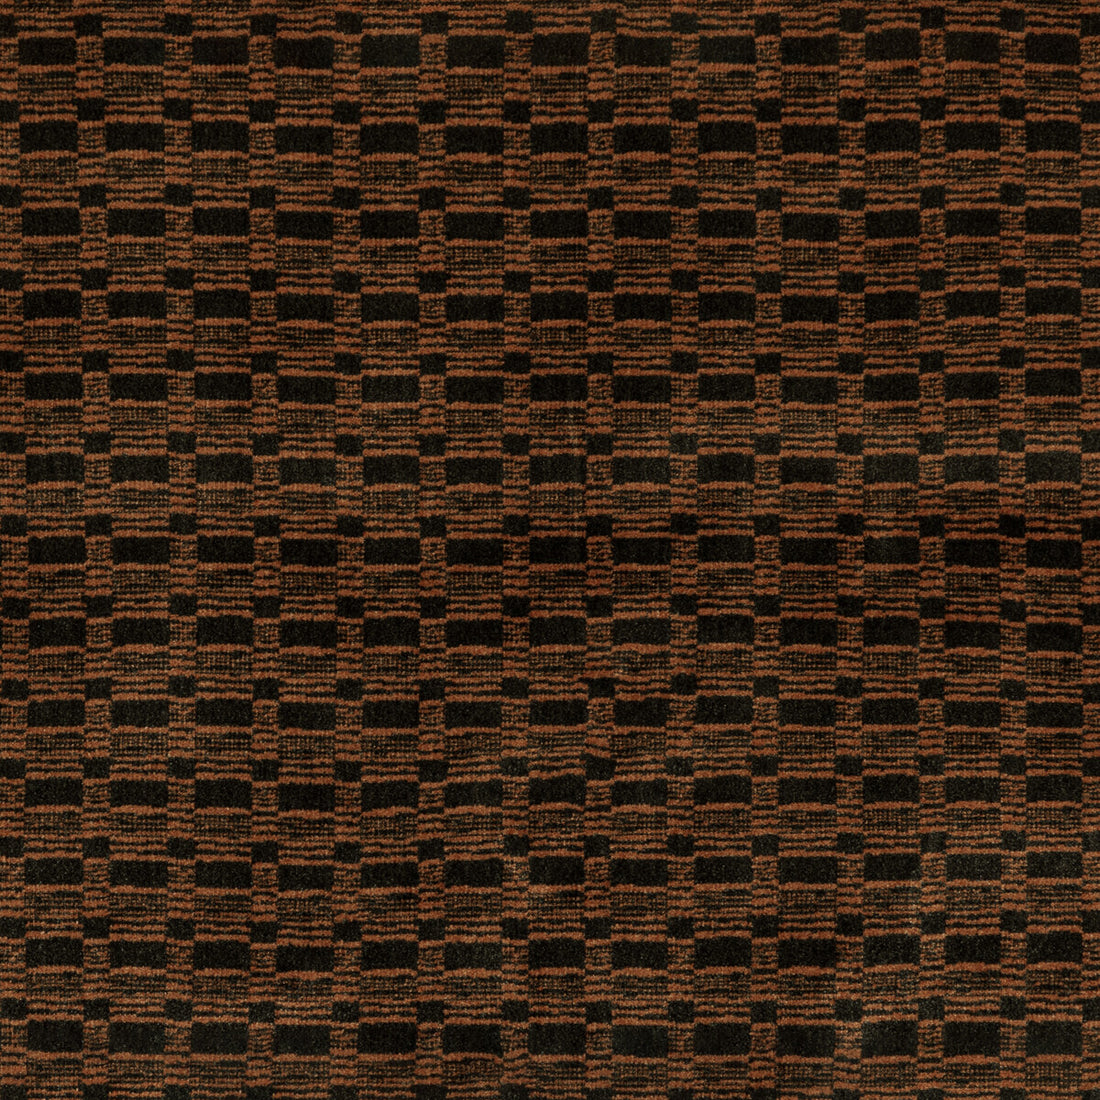 Lure fabric in charcoal/clay color - pattern GWF-3760.126.0 - by Lee Jofa Modern in the Kelly Wearstler VI collection